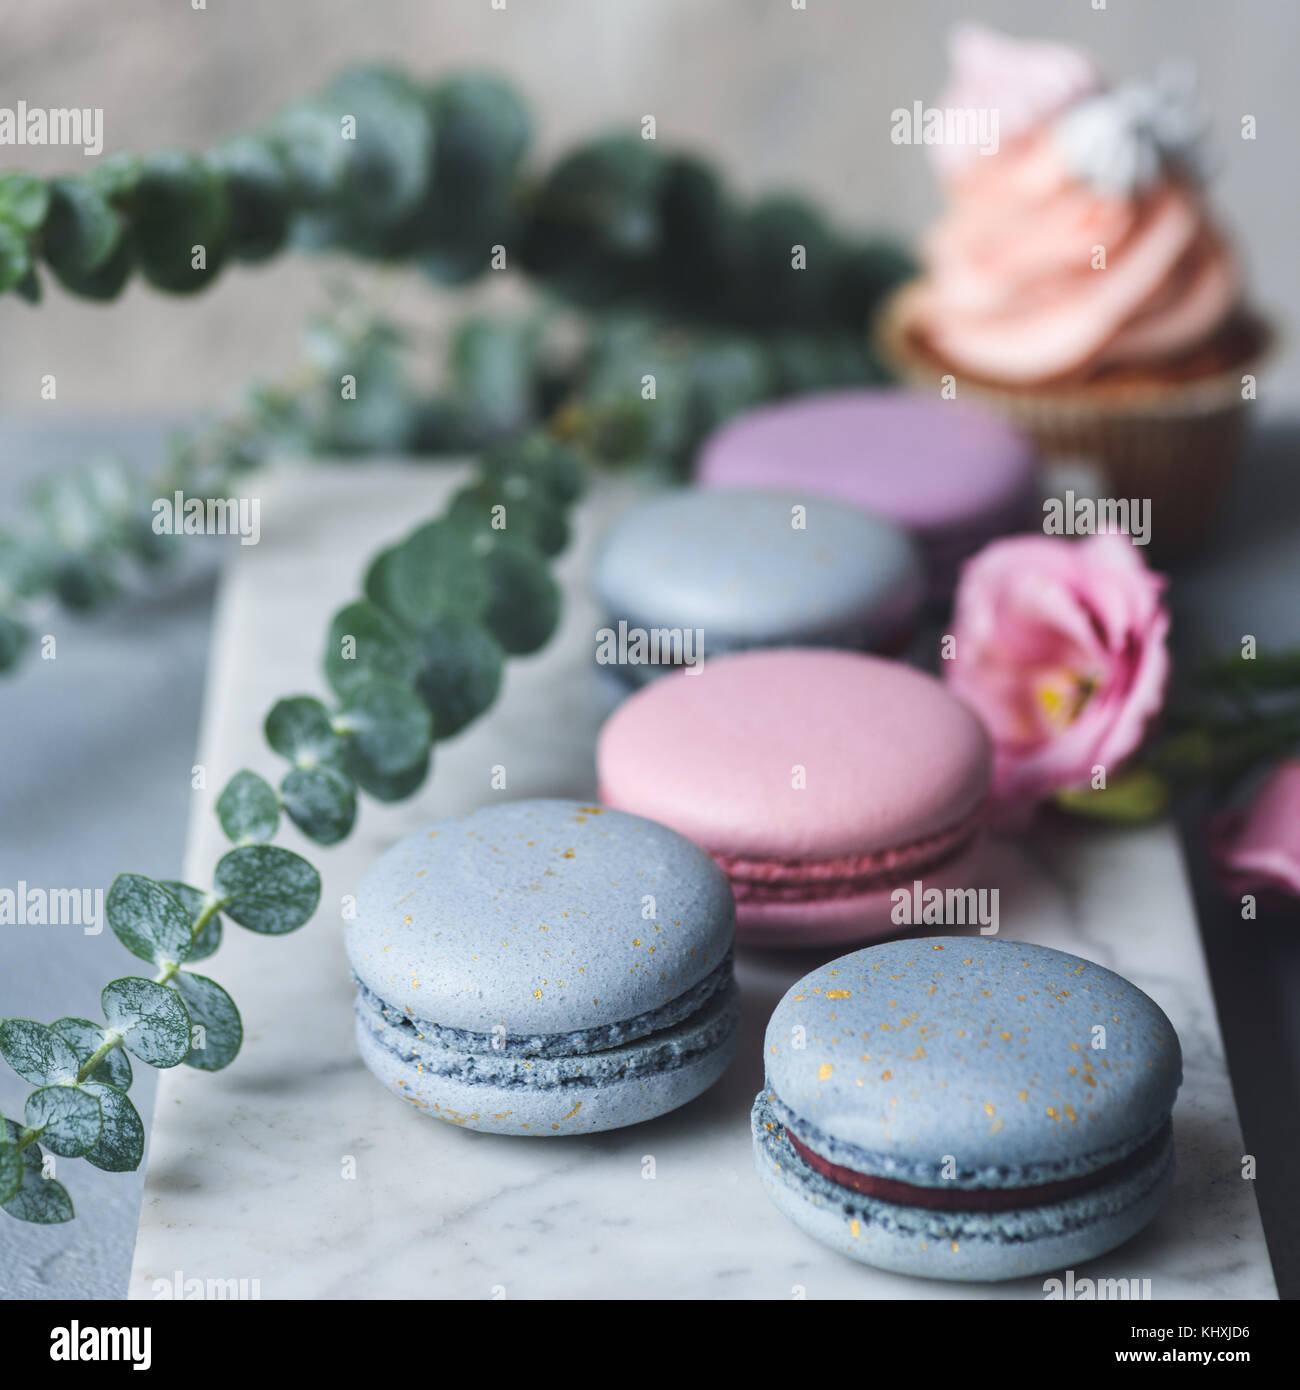 pastels and pastries : Marbleized